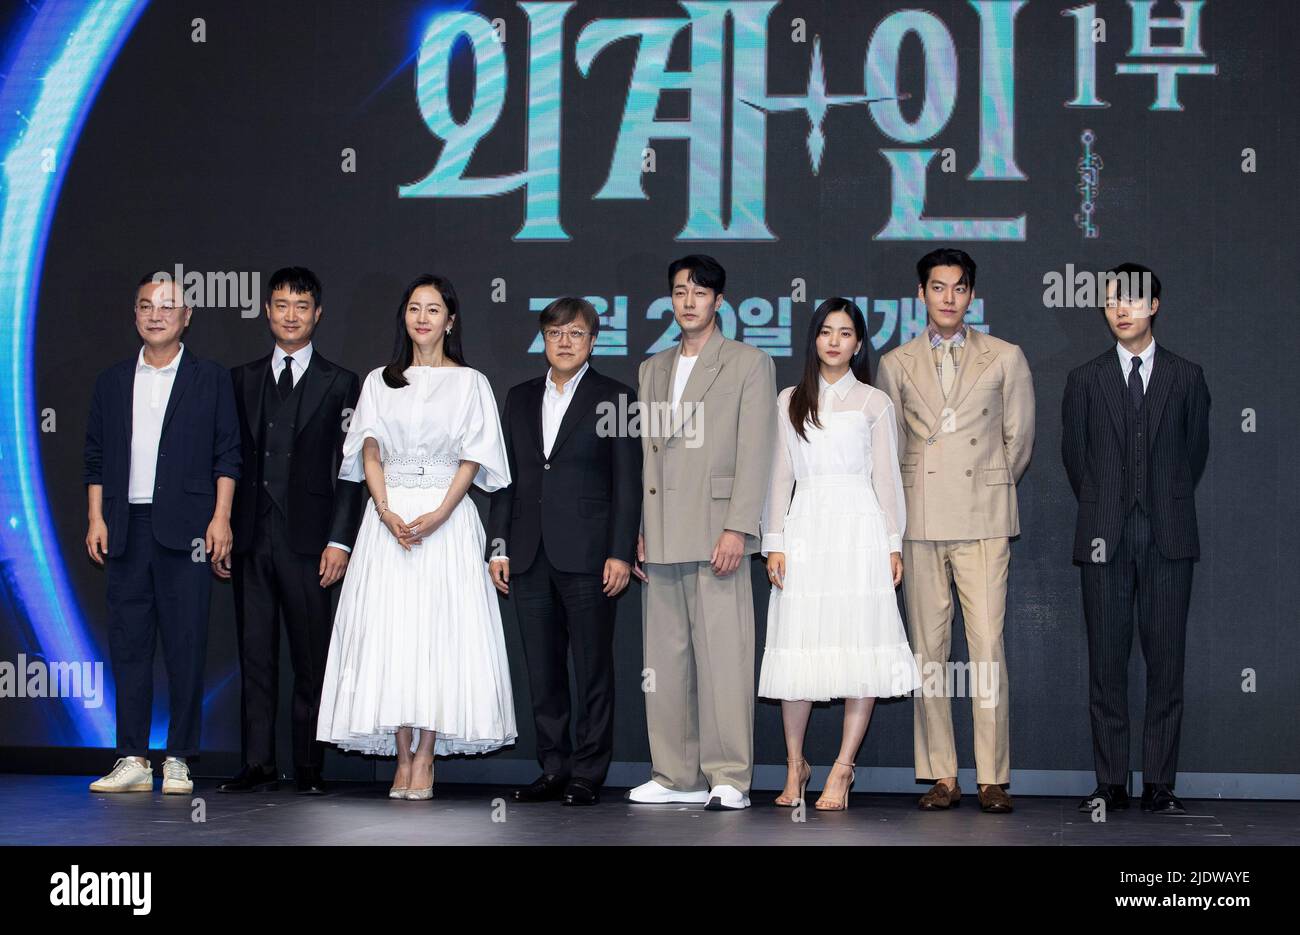 Seoul, South Korea. 23rd June, 2022. (L to R) South Korea actors Kim Eui-sung, Jo Woo-jin, Yum Jung-ah, director Choi Dong-hoon, So Ji-sub, Kim Tae-ri, Kim Woo-bin and Ryu Jun-yeol, poses for photos during a press conference the film 'Alienoid' in Seoul, South Korea on Jun 23, 2022. The movie is to be released in South Korea on July 20. (Photo by Lee Young-ho/Sipa USA) Credit: Sipa USA/Alamy Live News Stock Photo